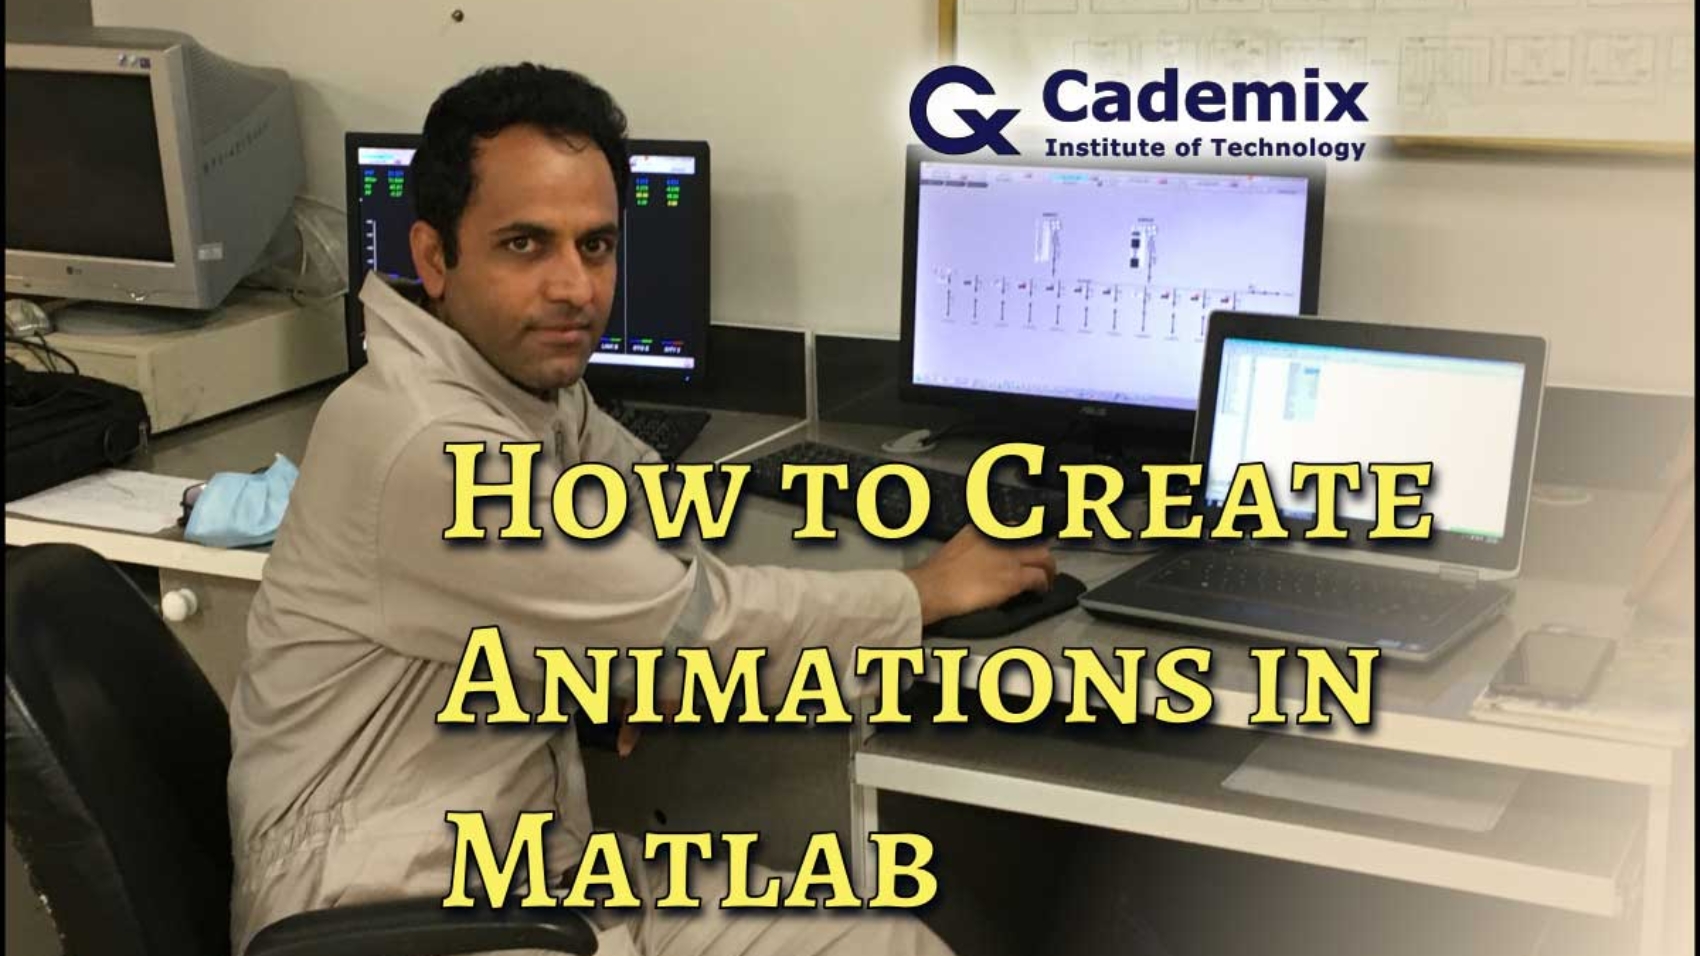 Create Animations in Matlab Ahmad Atash Afzon Cademix Magazine Article Mask Pandemic Projects